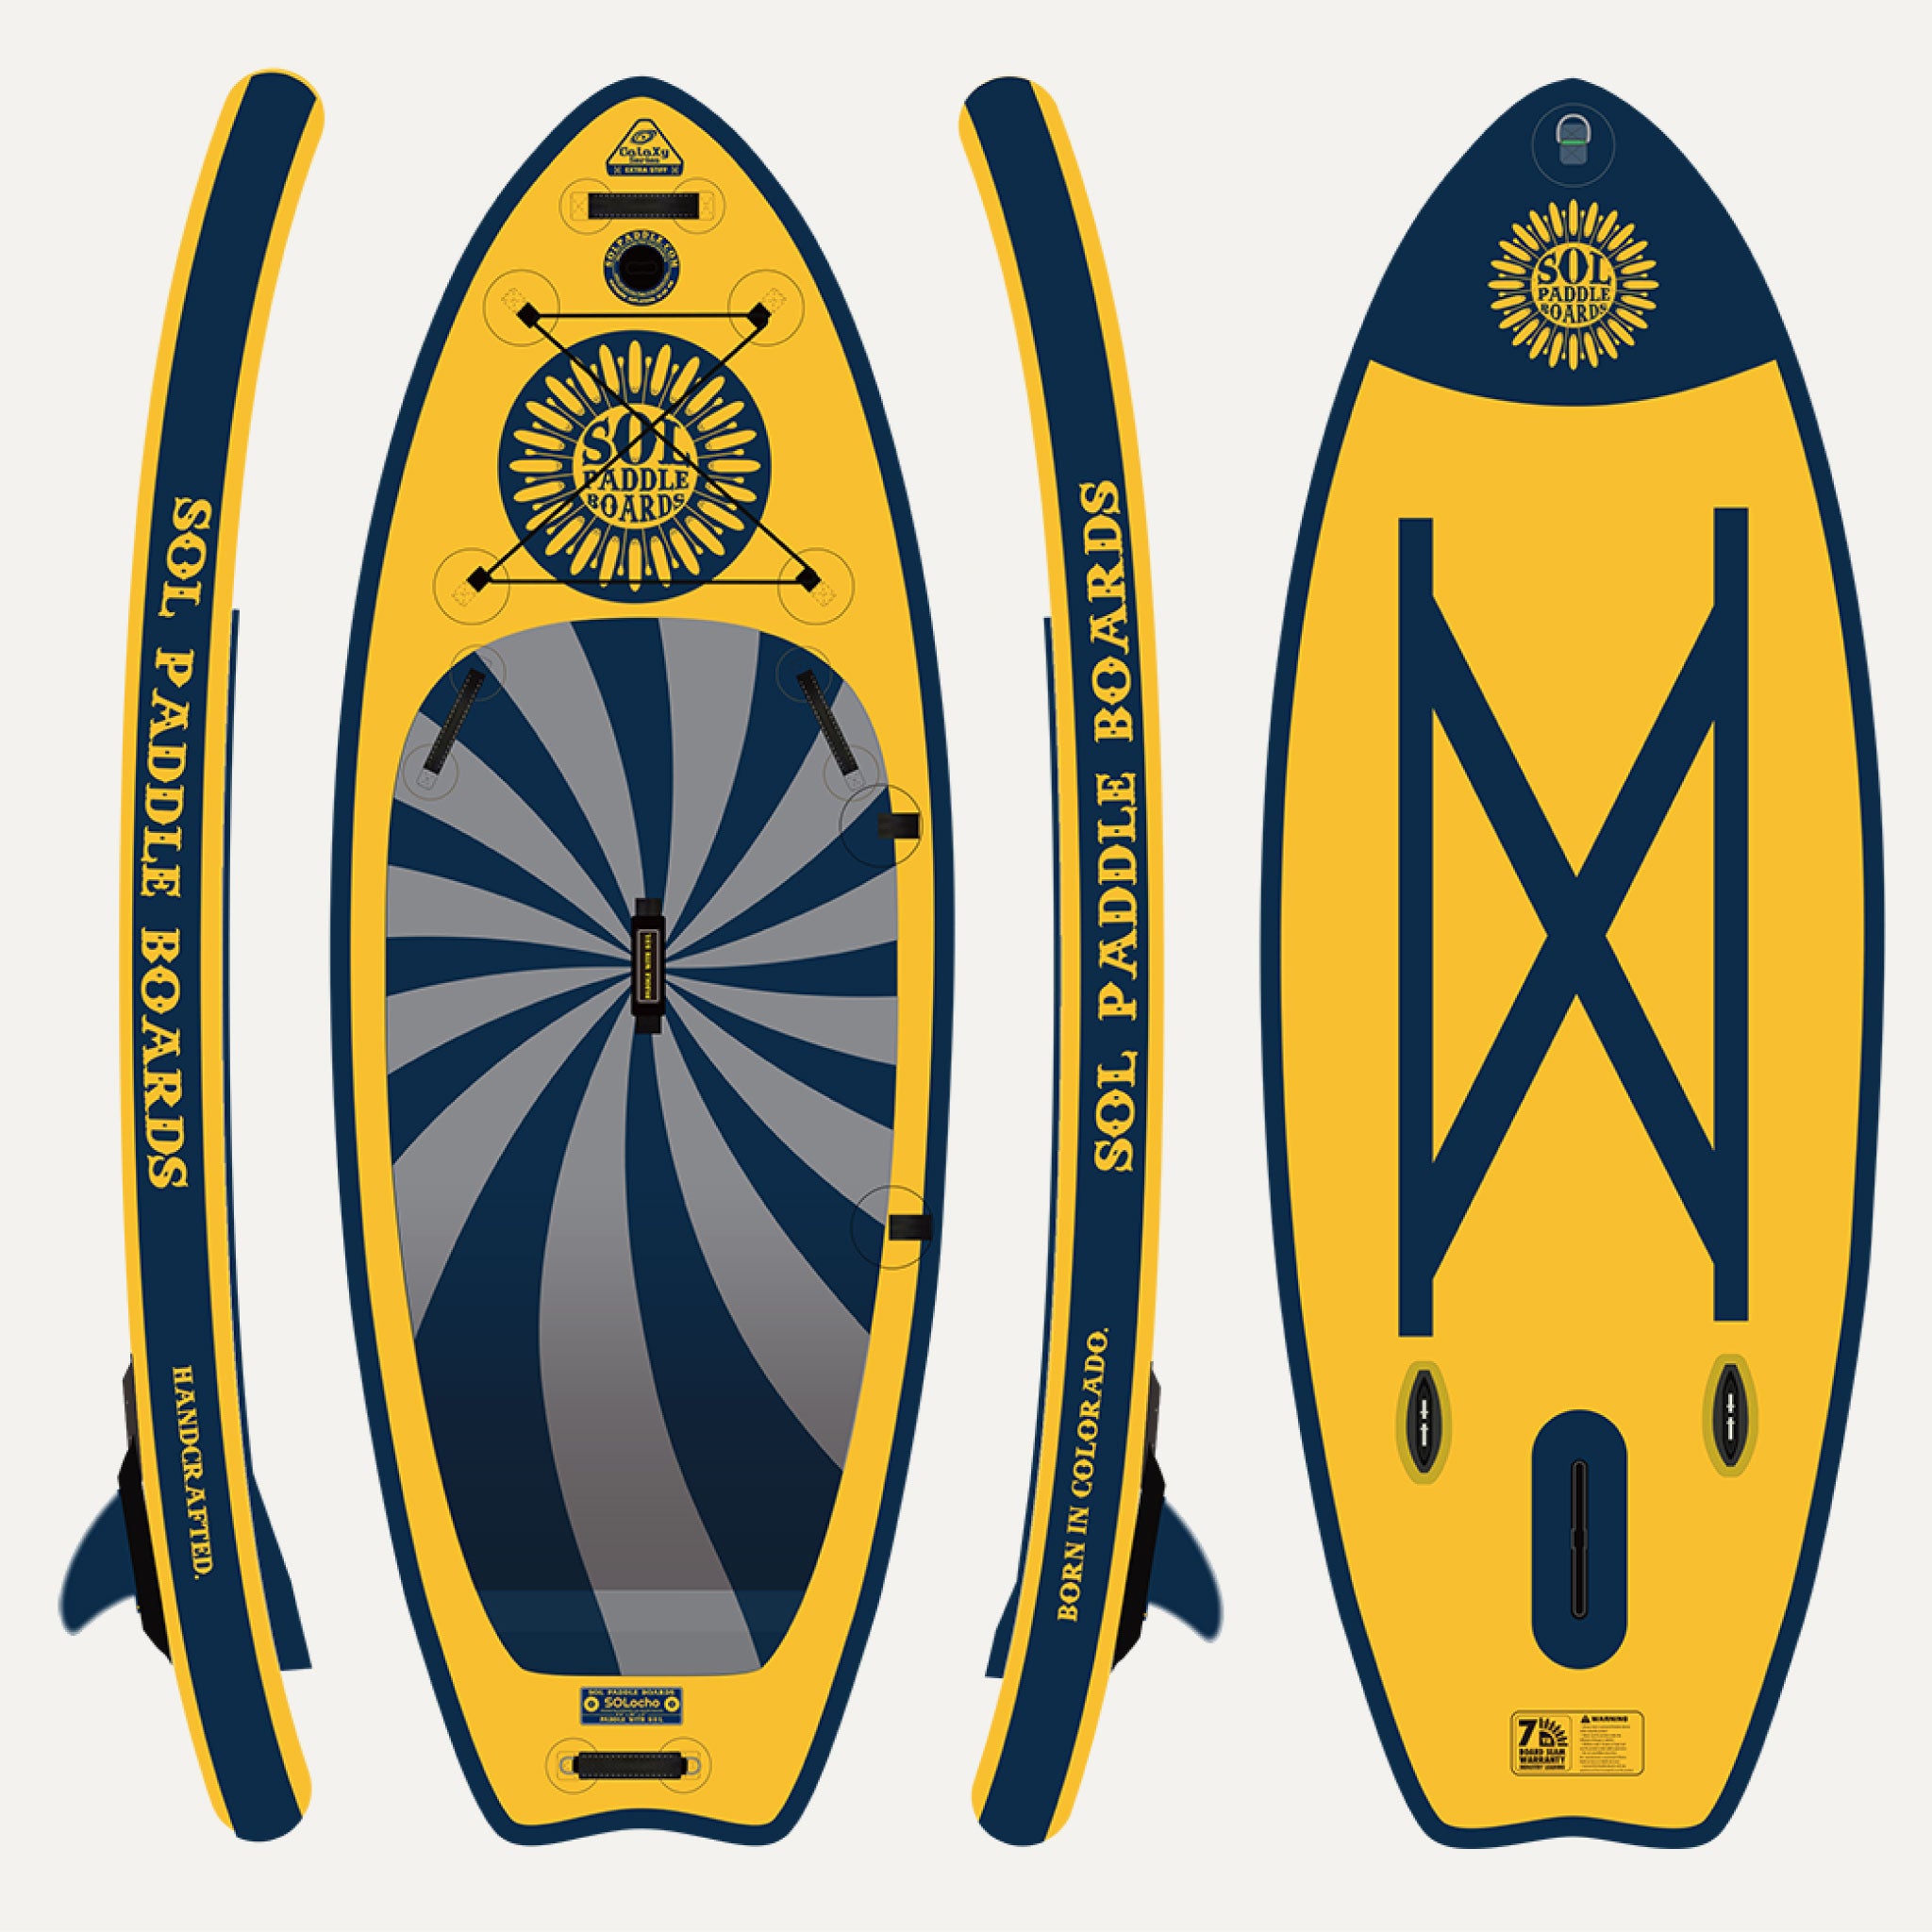 GalaXy SOLriverocho Inflatable Paddle Board showcasing all four sides of the SUP board